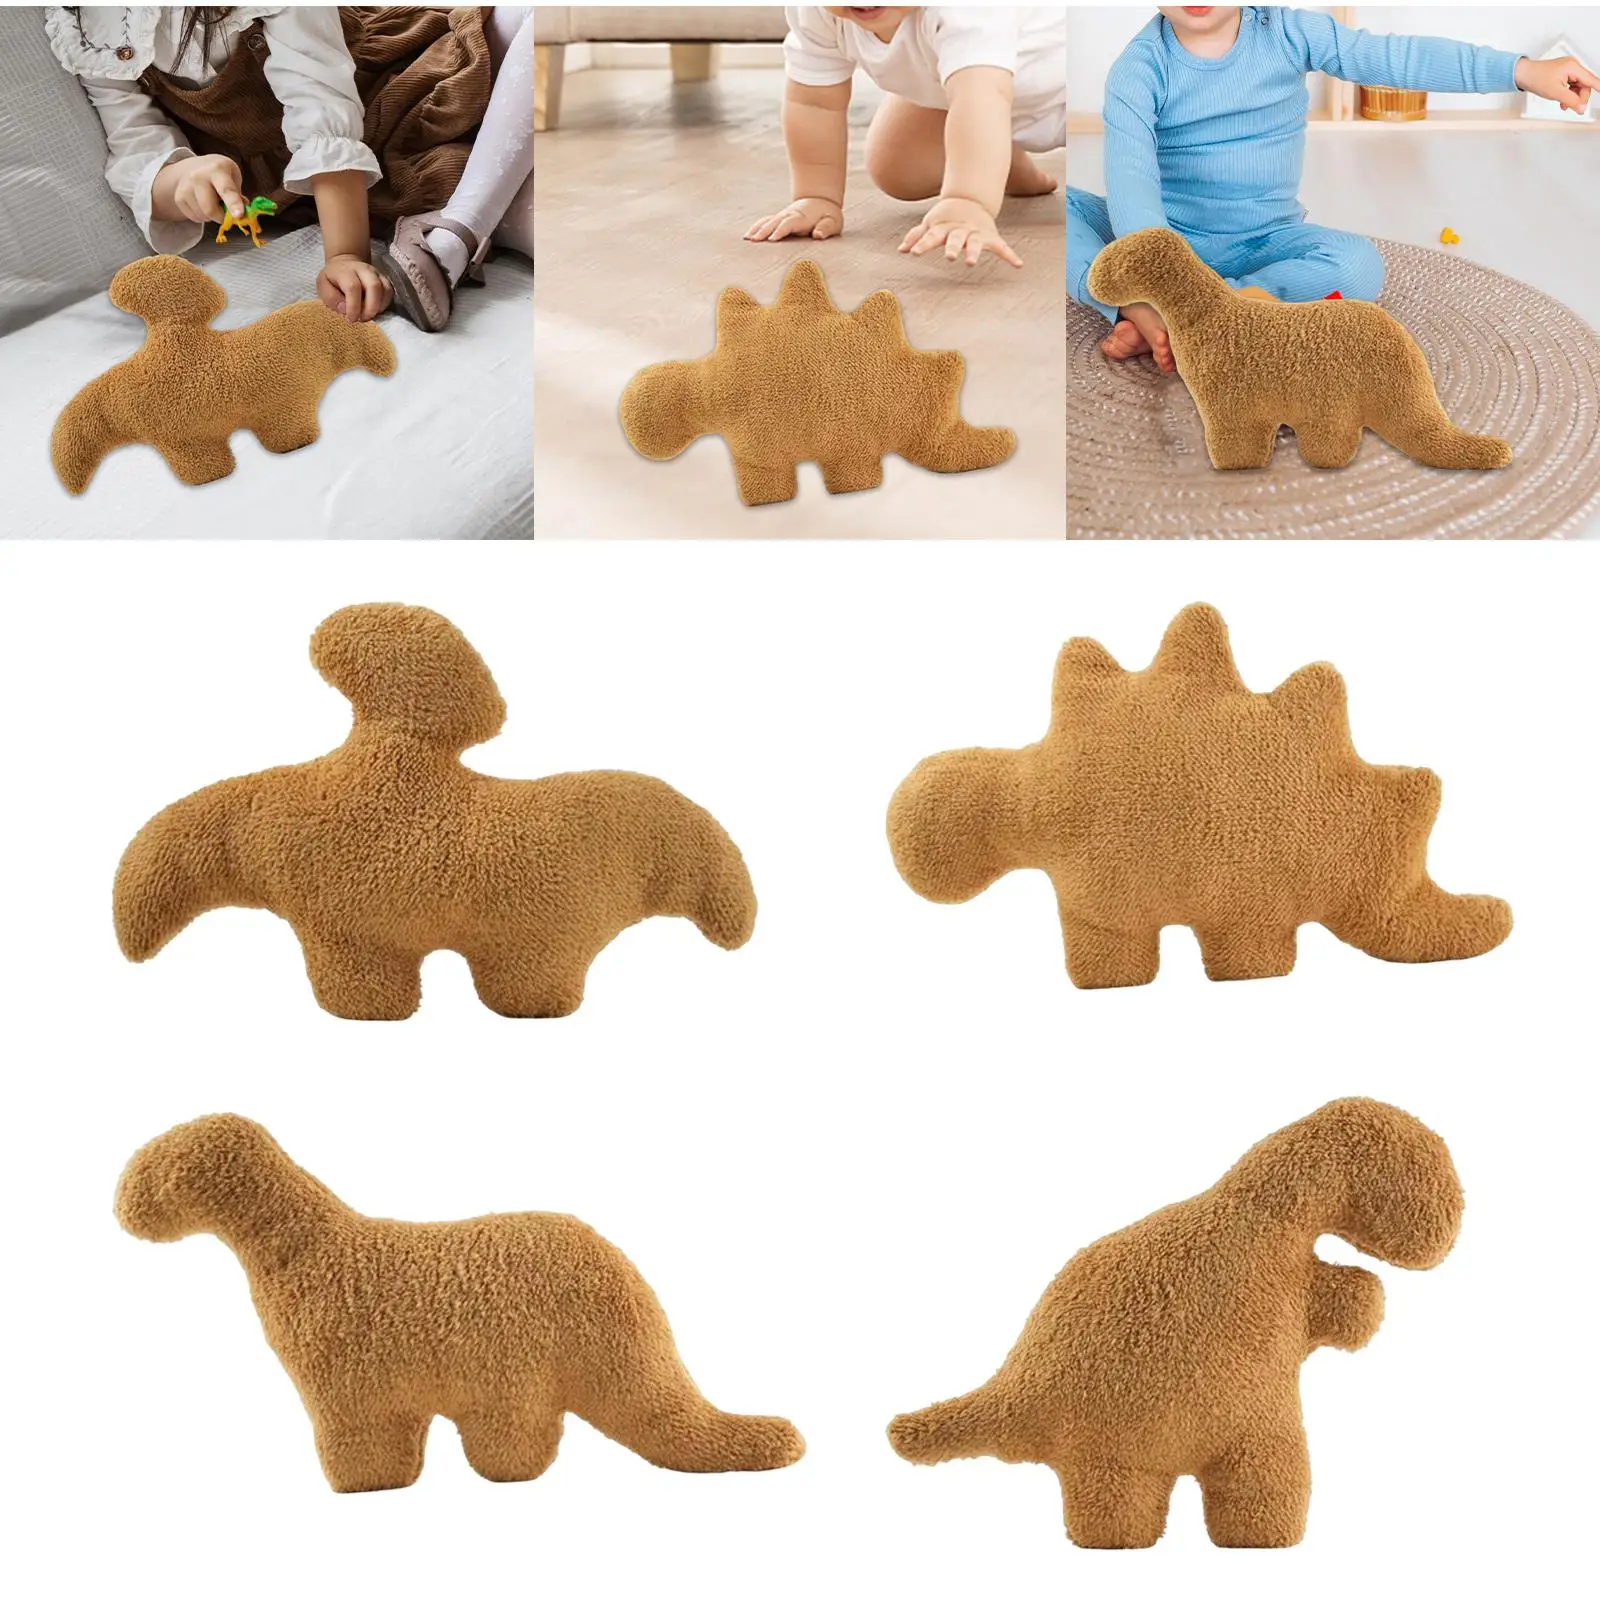 Dinosaur Chicken Nuggets Huggable for Photo Prop Dinosaur Theme Holiday Gift